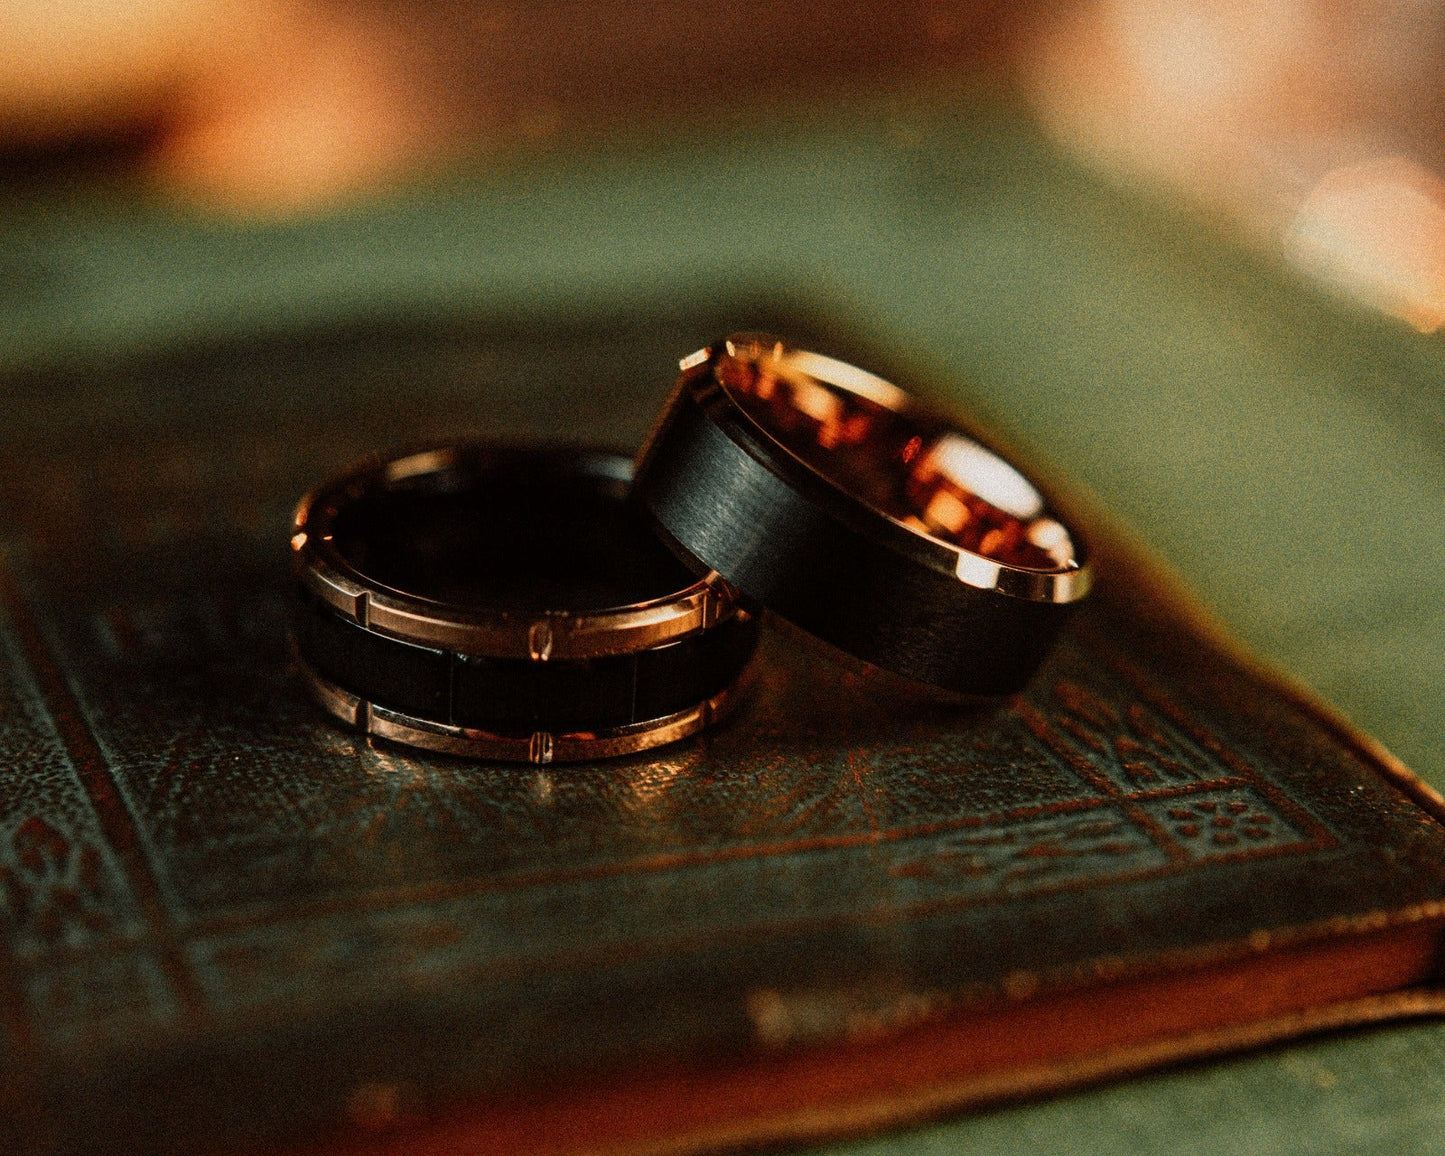 The “Gatsby” Ring by Vintage Gentlemen